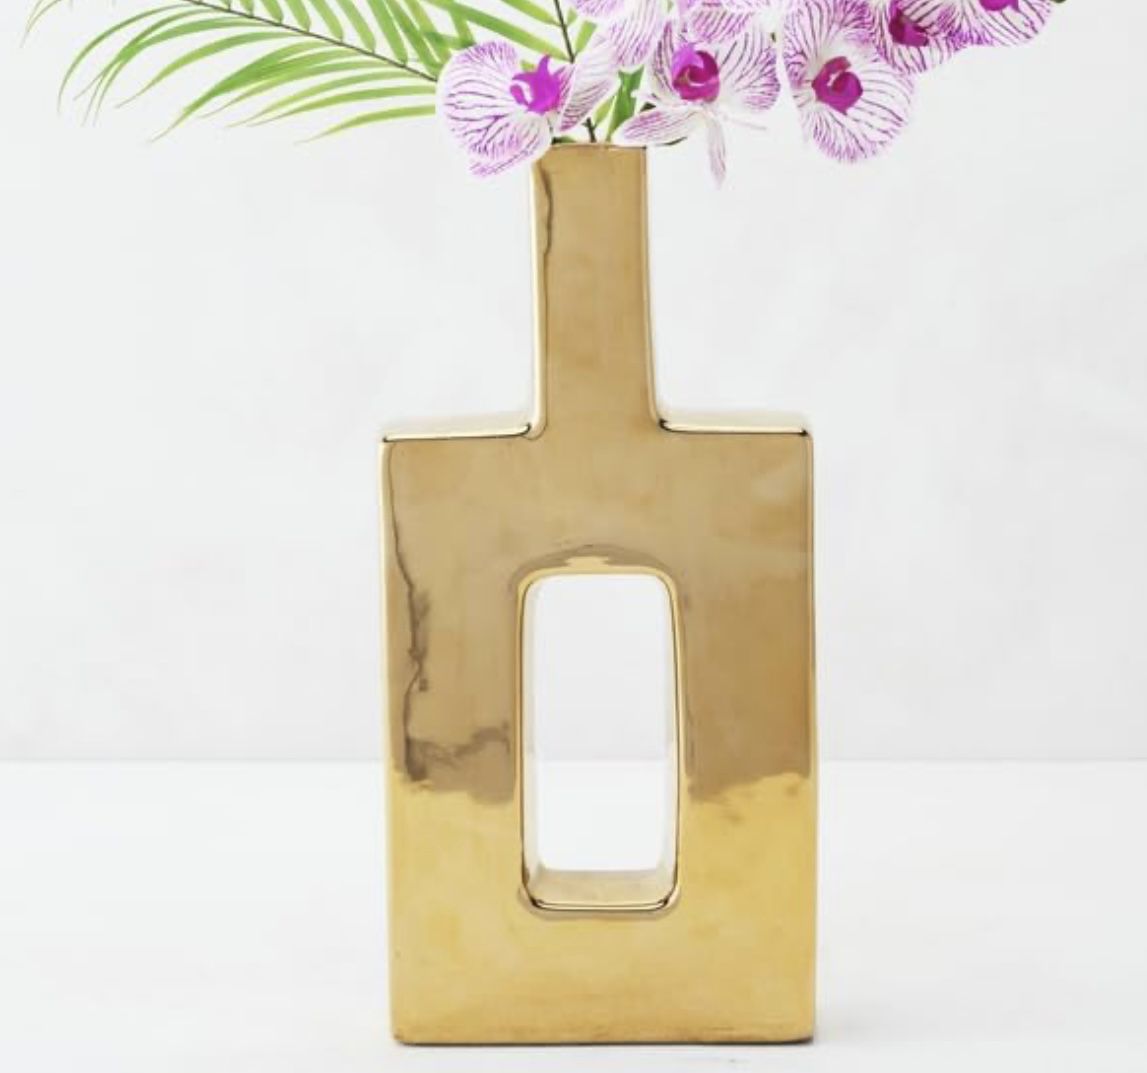 Gold Large Ceramic Vase for Flowers - Contemporary Decorative Modern Abstract Geometric Centerpiece 